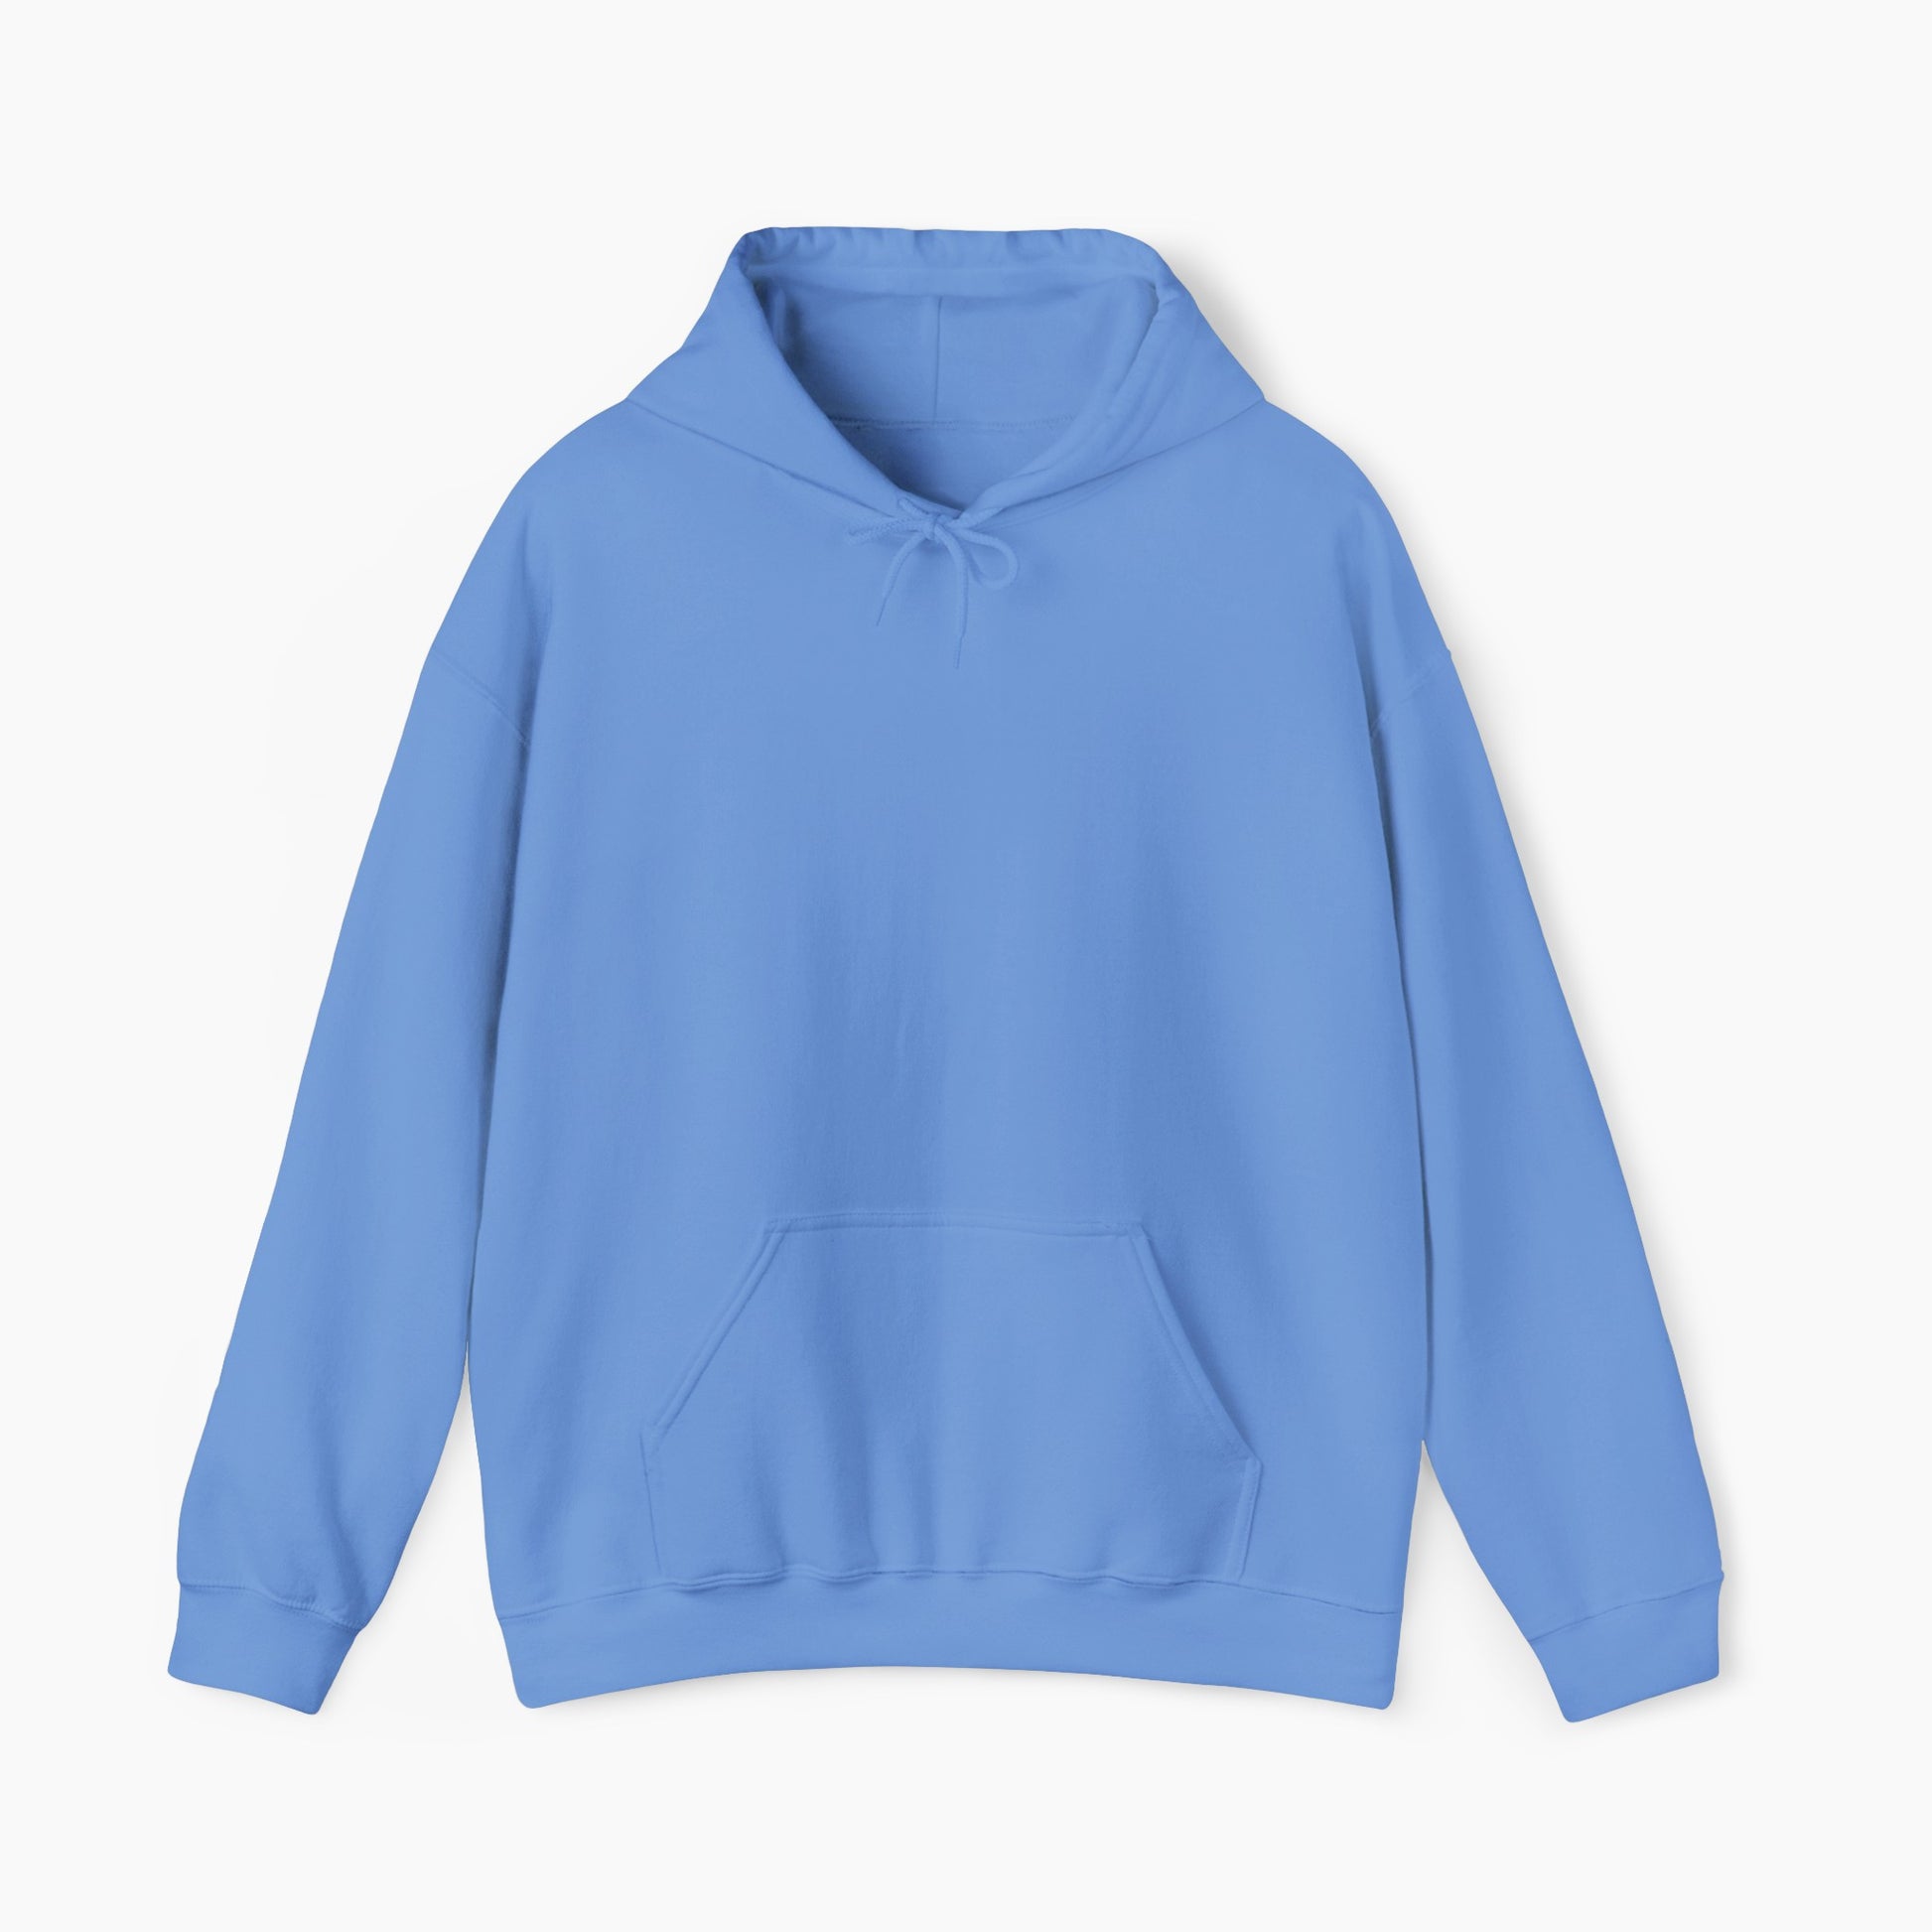 Front view of a plain blue hoodie on a plain background.